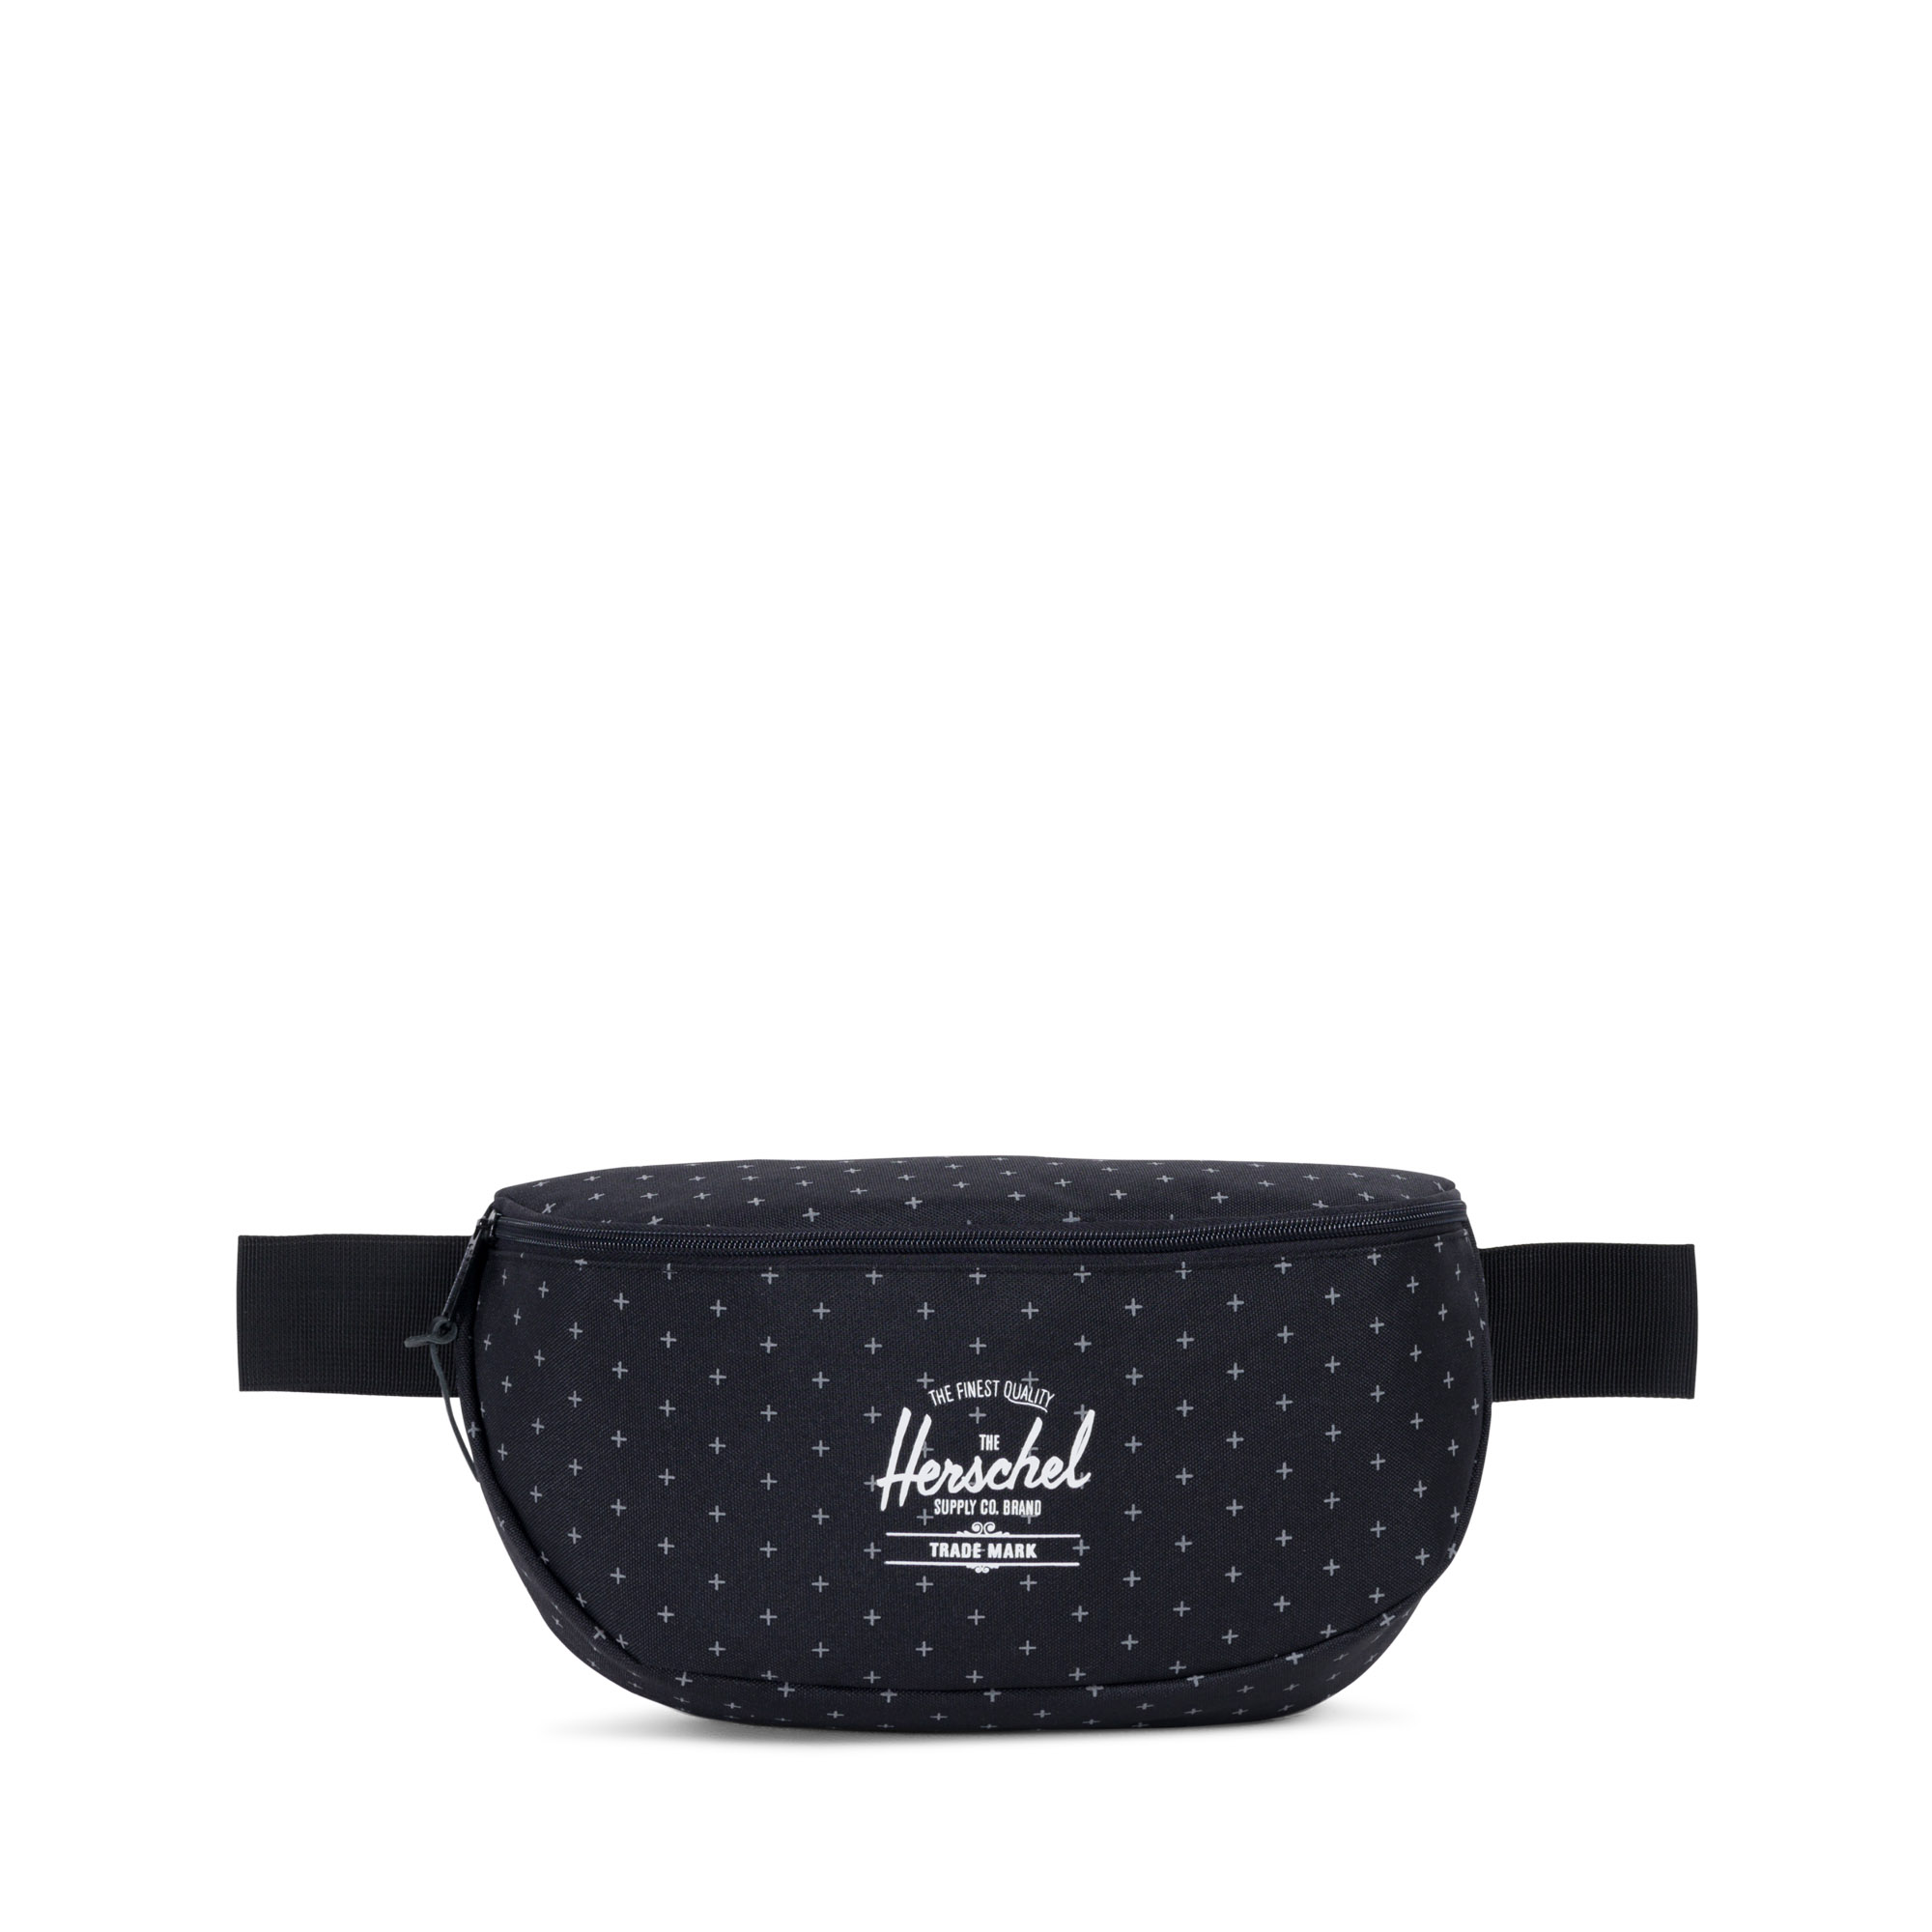 Sixteen Hip Pack Herschel Supply Company - red fanny pack roblox